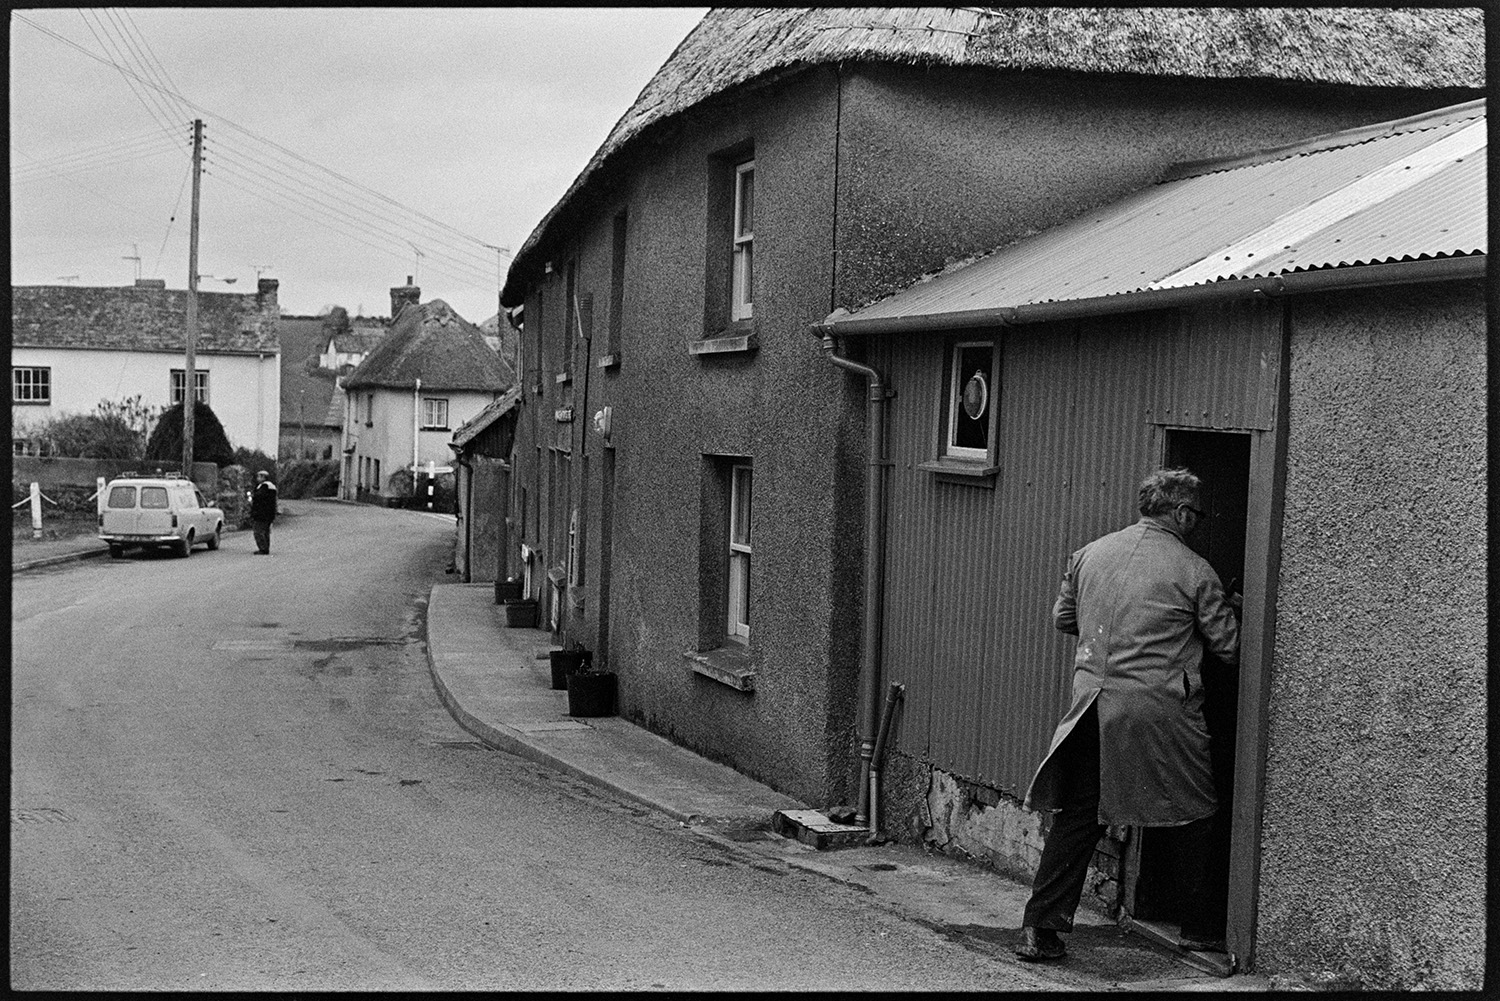 Street scene with man going into door of workshop. 
[A man going into a workshop with a corrugated iron roof and attached to a thatched cottage, in a street in Monkokehampton.]